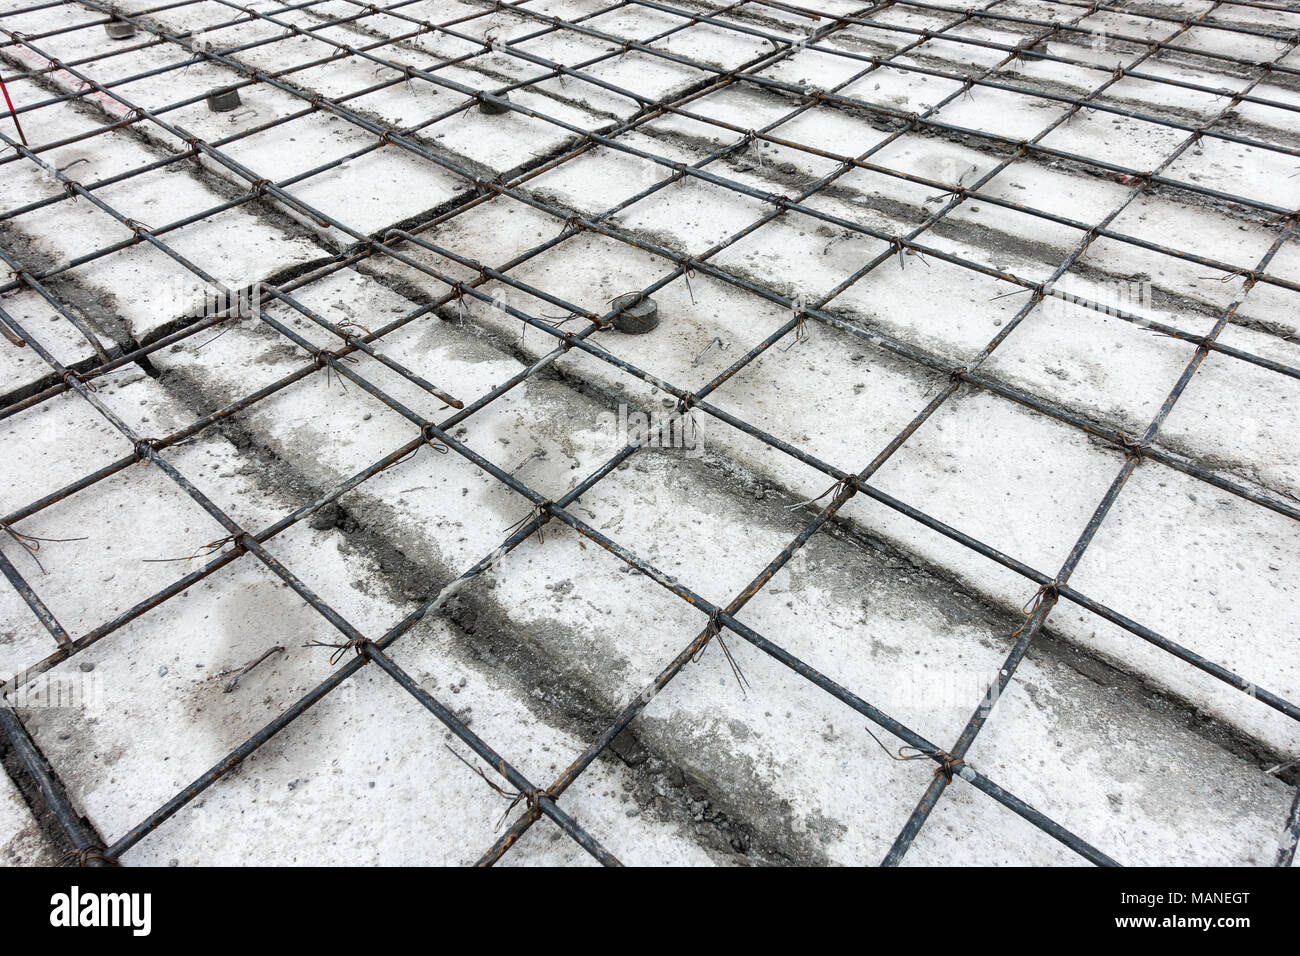 Concrete casting preparation and layout for steel rebar. Stock Photo